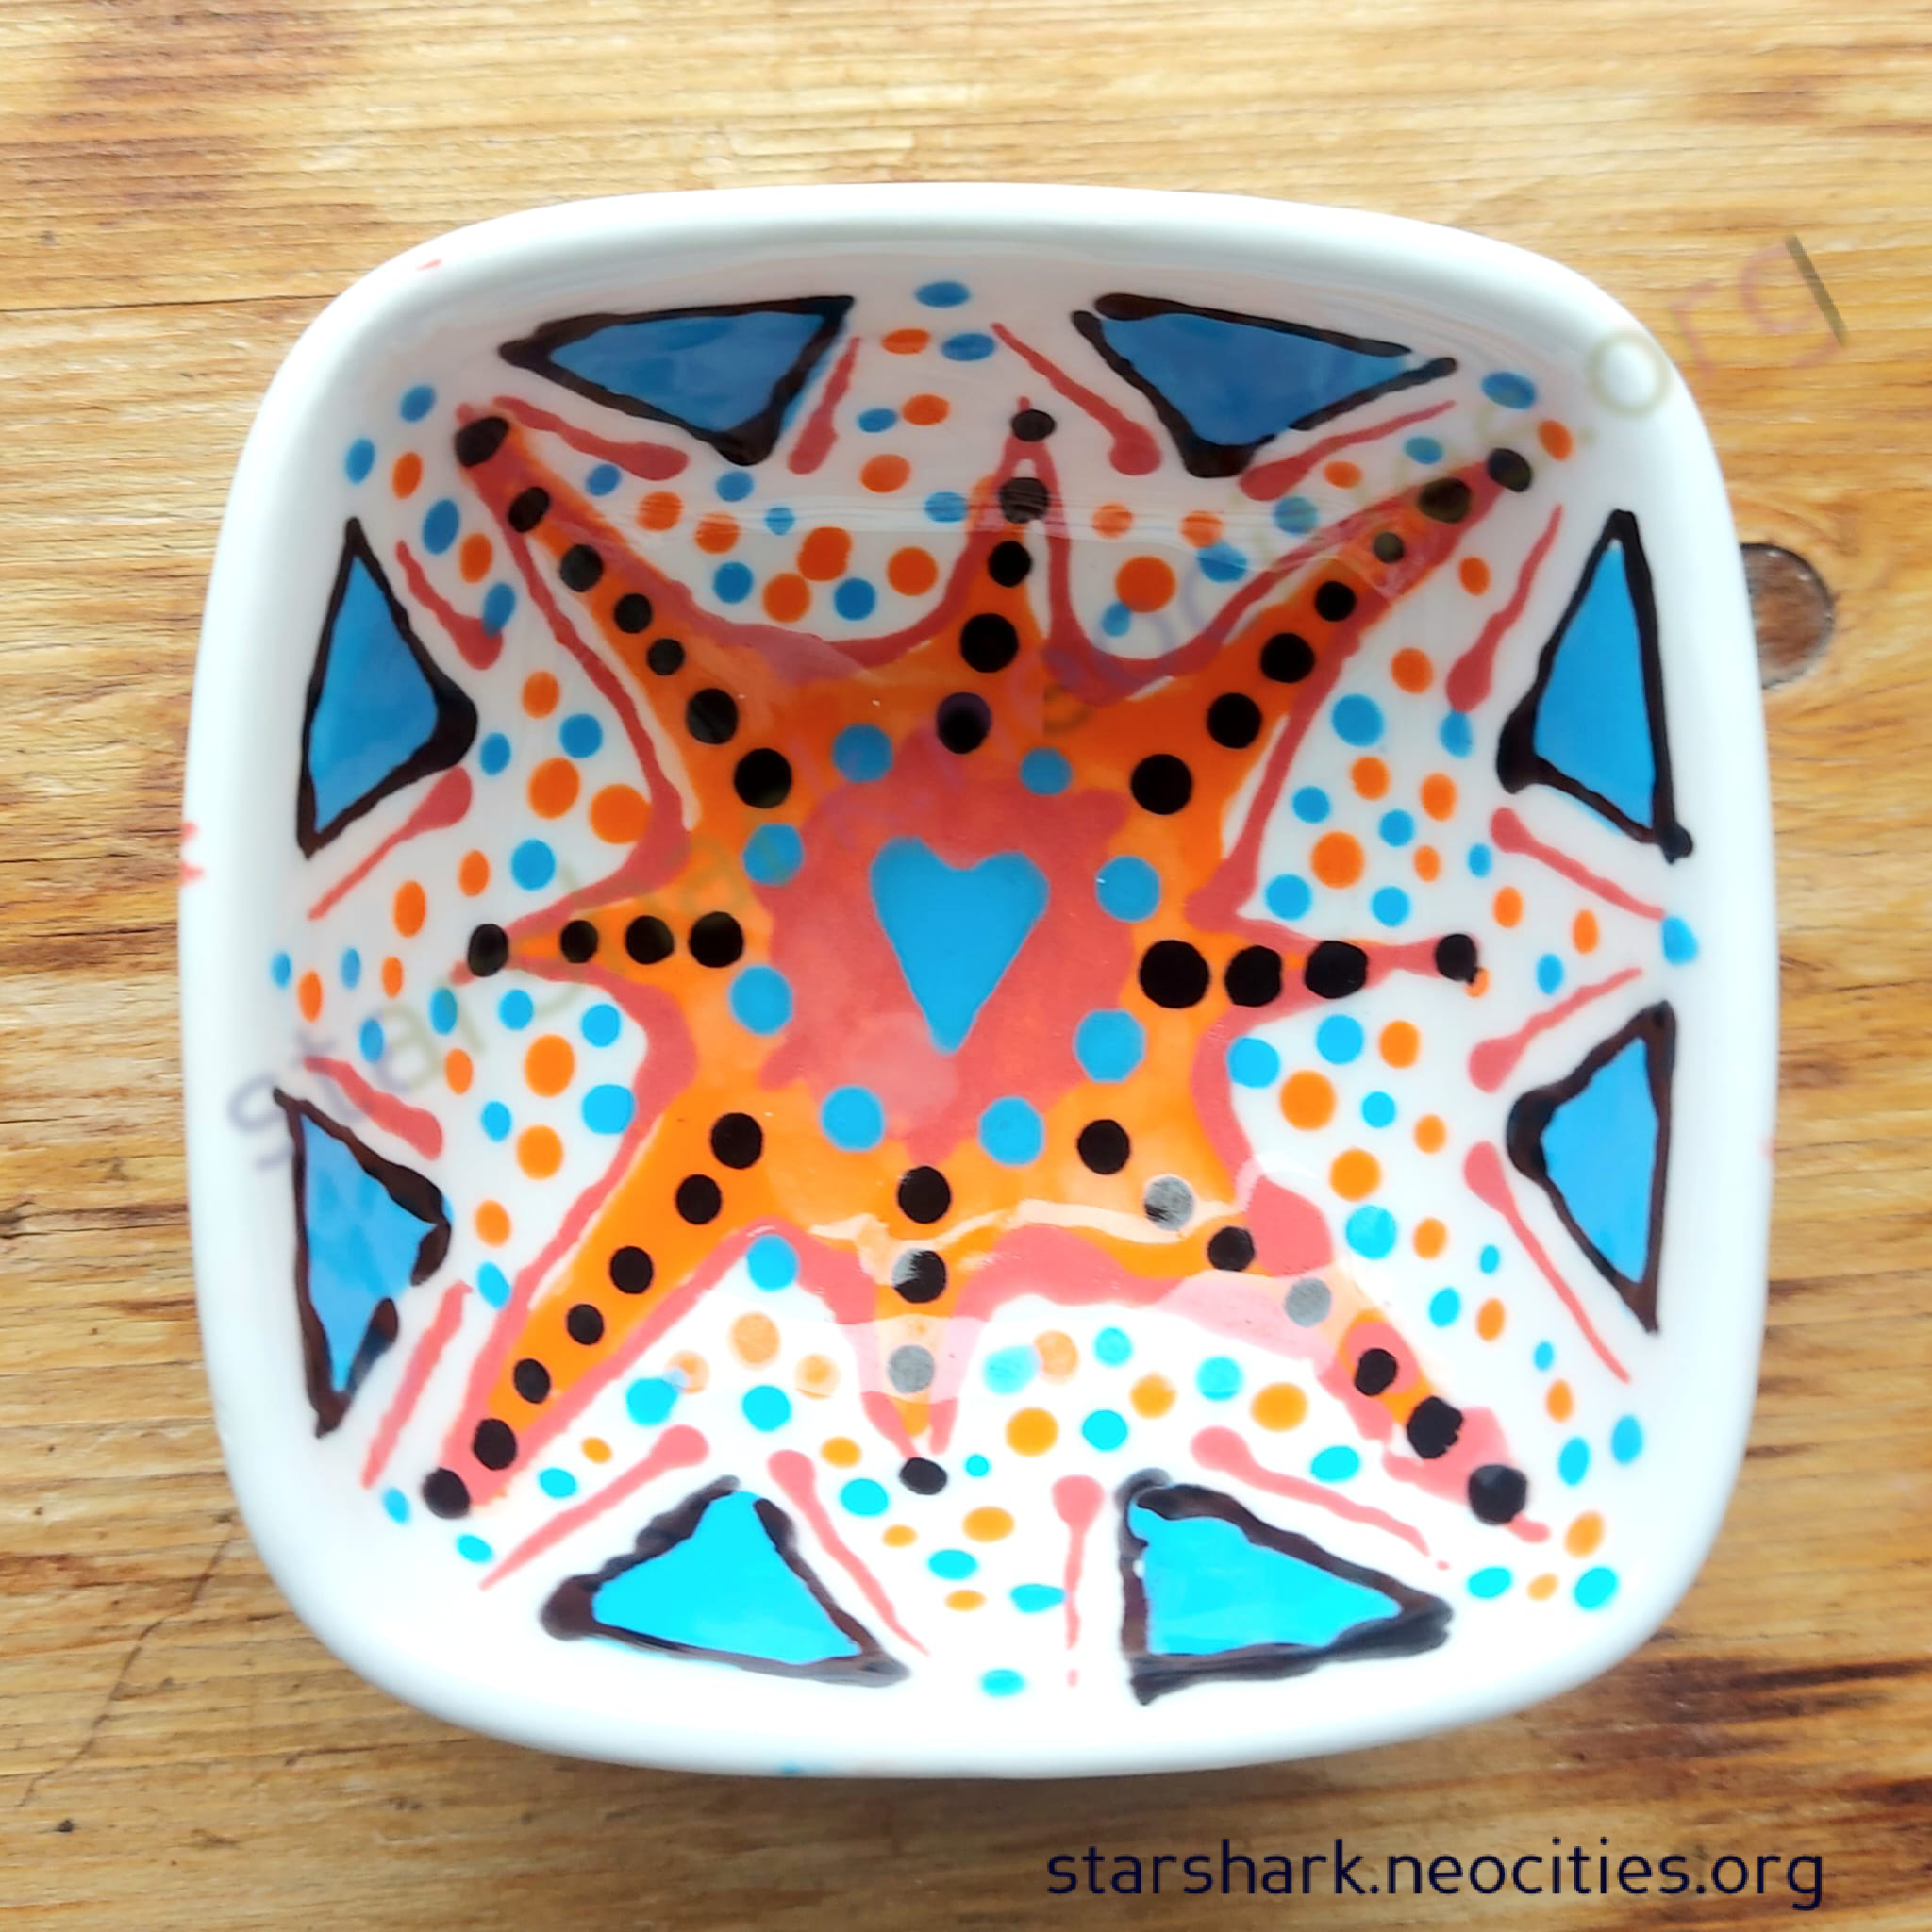 the first small ceramic trinket bowl with blue, orange, red and black designs.